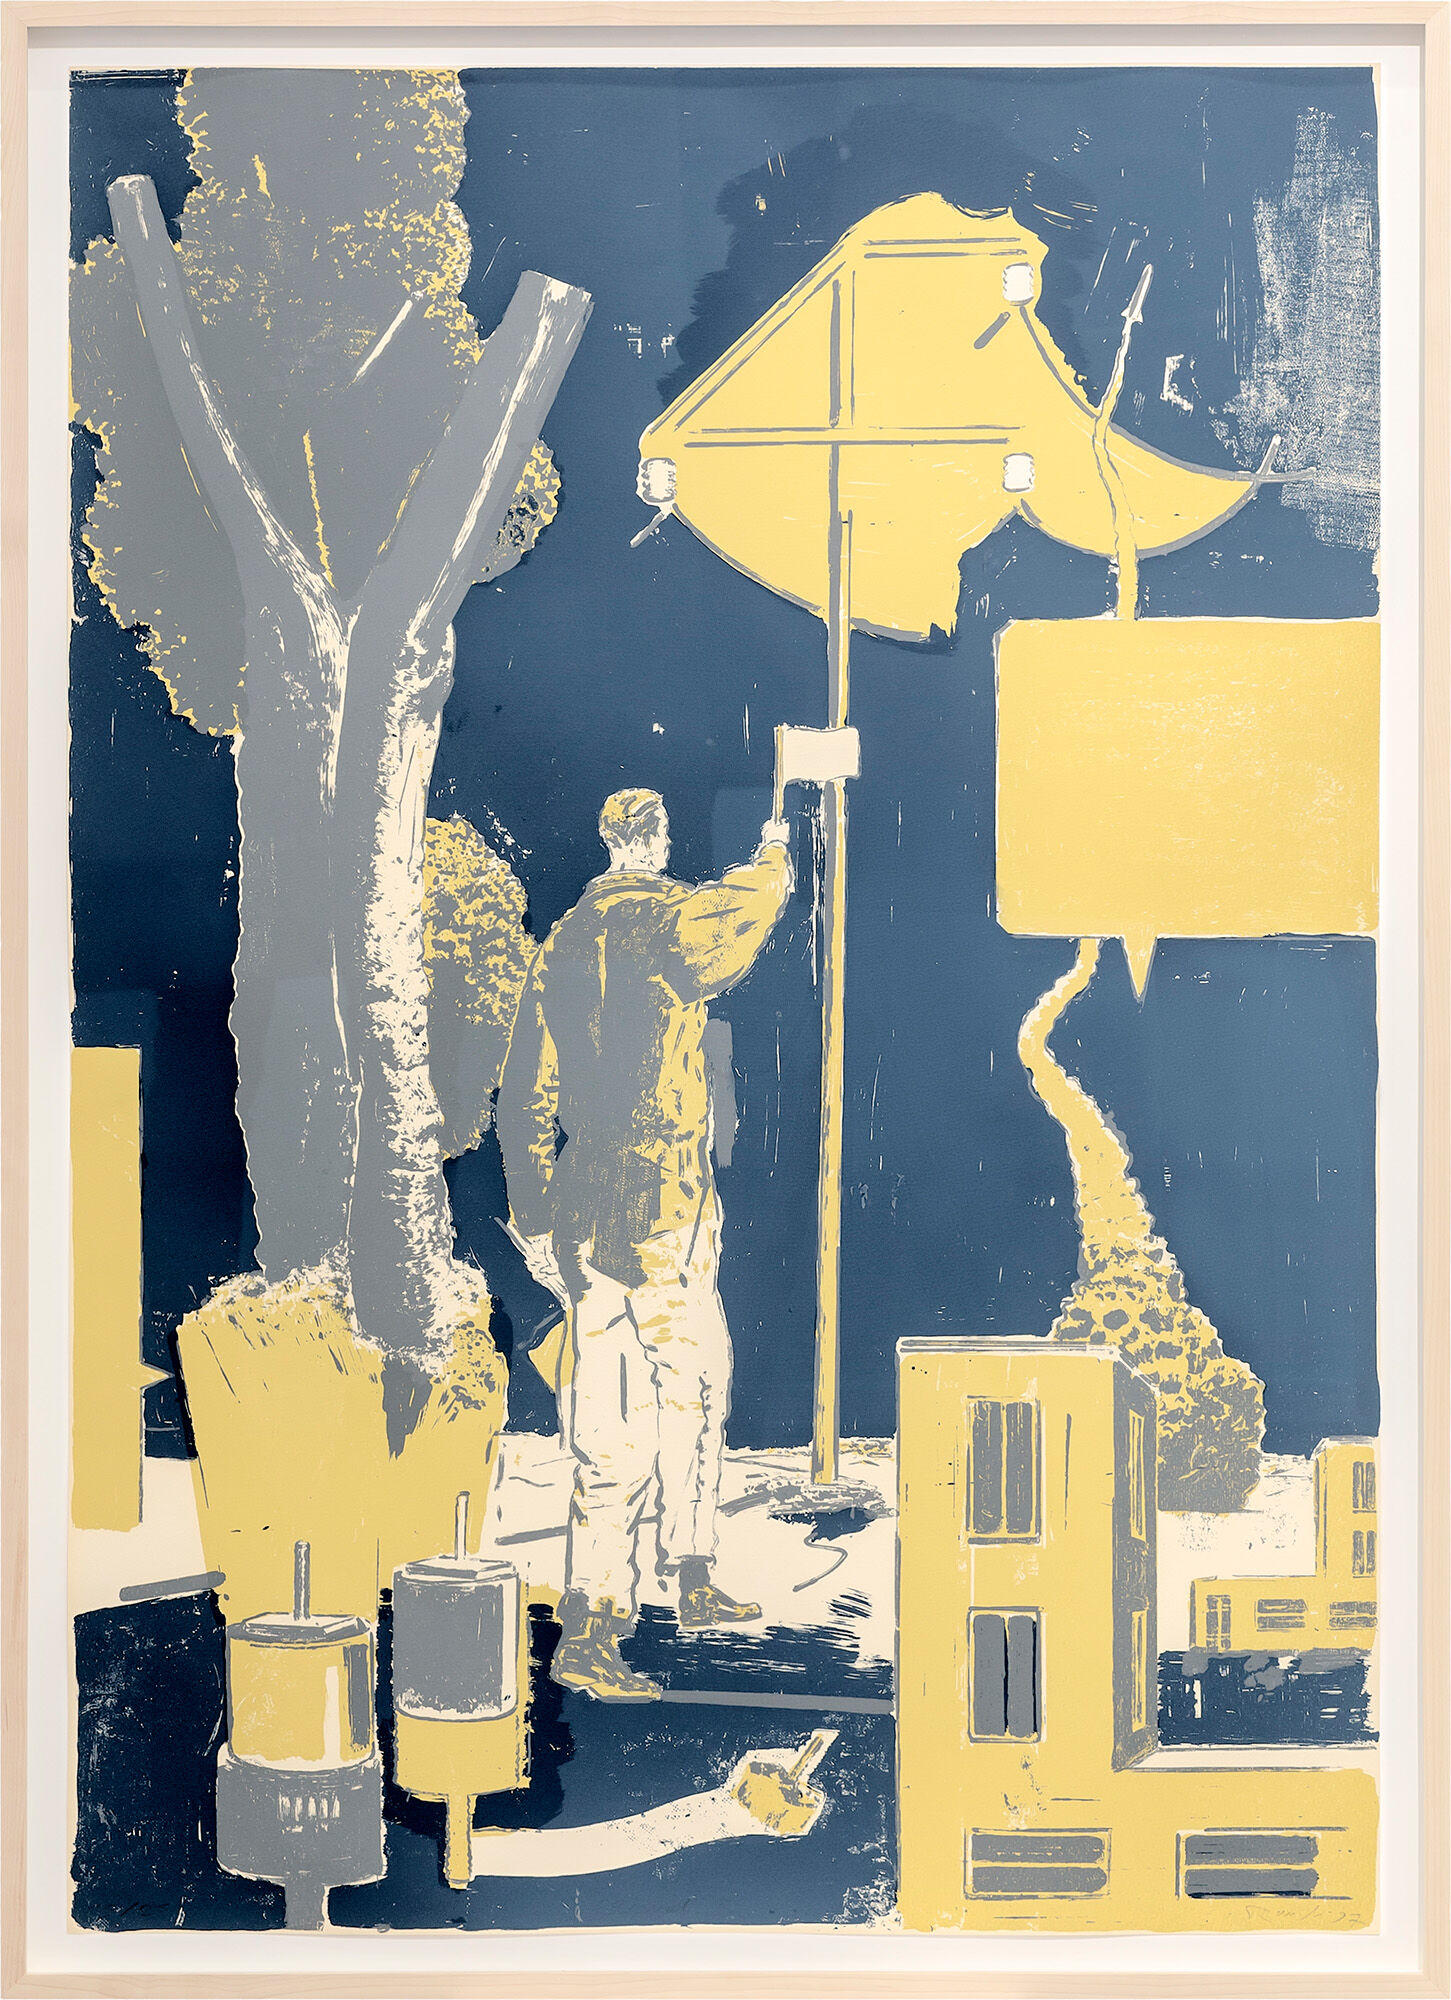 Picture "Signal" (1997) by Neo Rauch